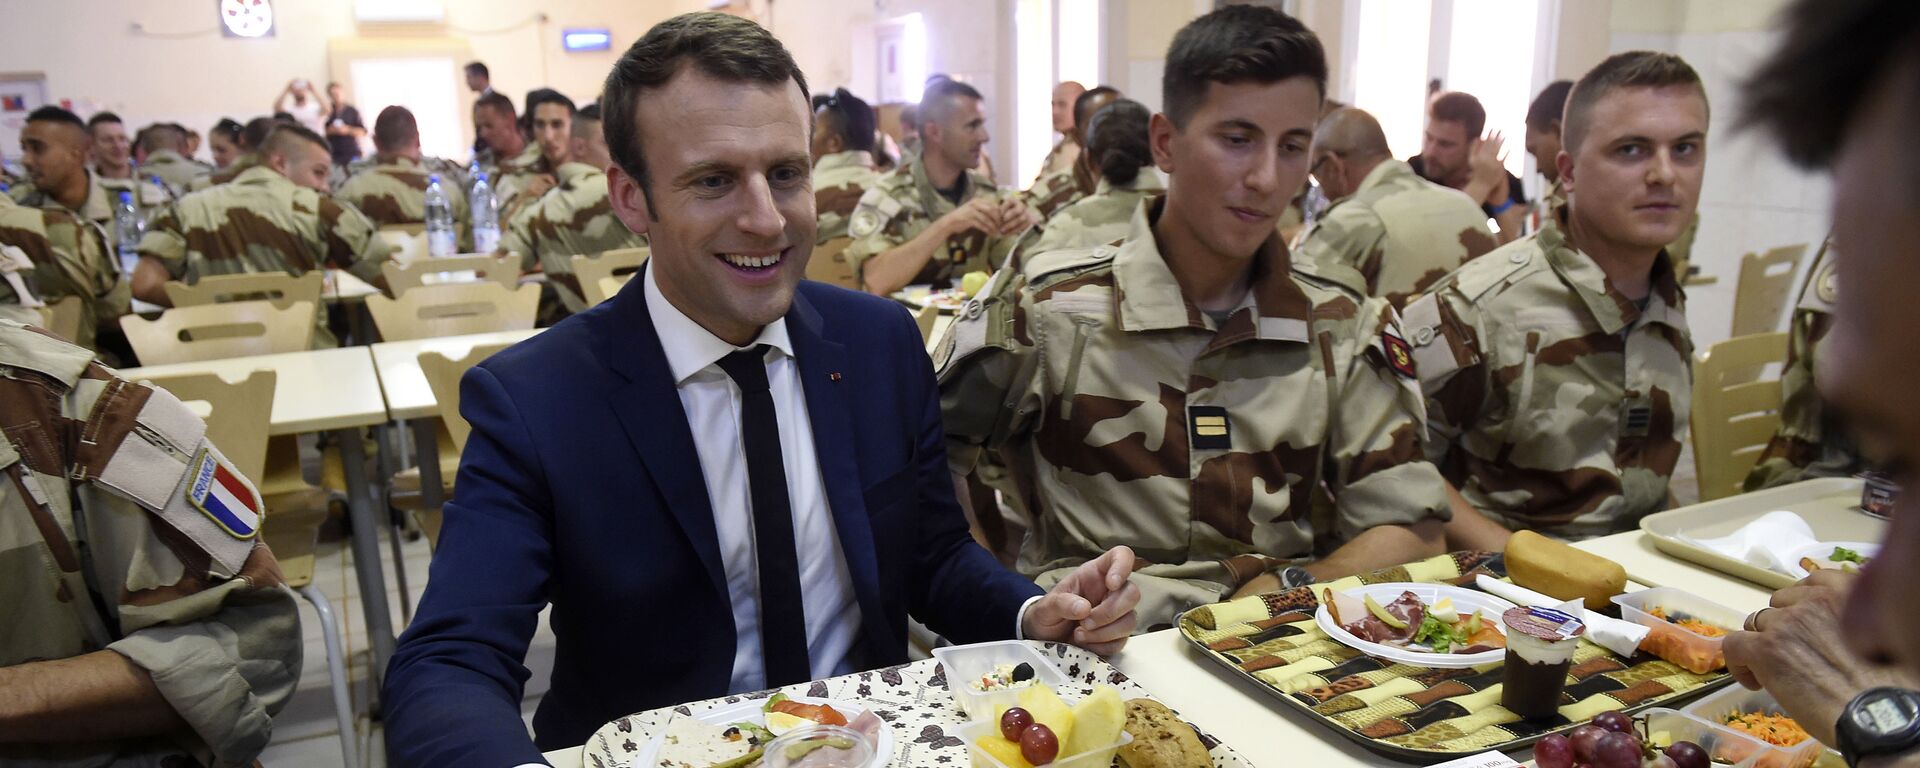 French President Emmanuel Macron (C) has a lunch break with French troops during his visit to France's Barkhane counter-terrorism operation in Africa's Sahel region in Gao, northern Mali, on May 19, 2017.  - Sputnik International, 1920, 28.06.2021